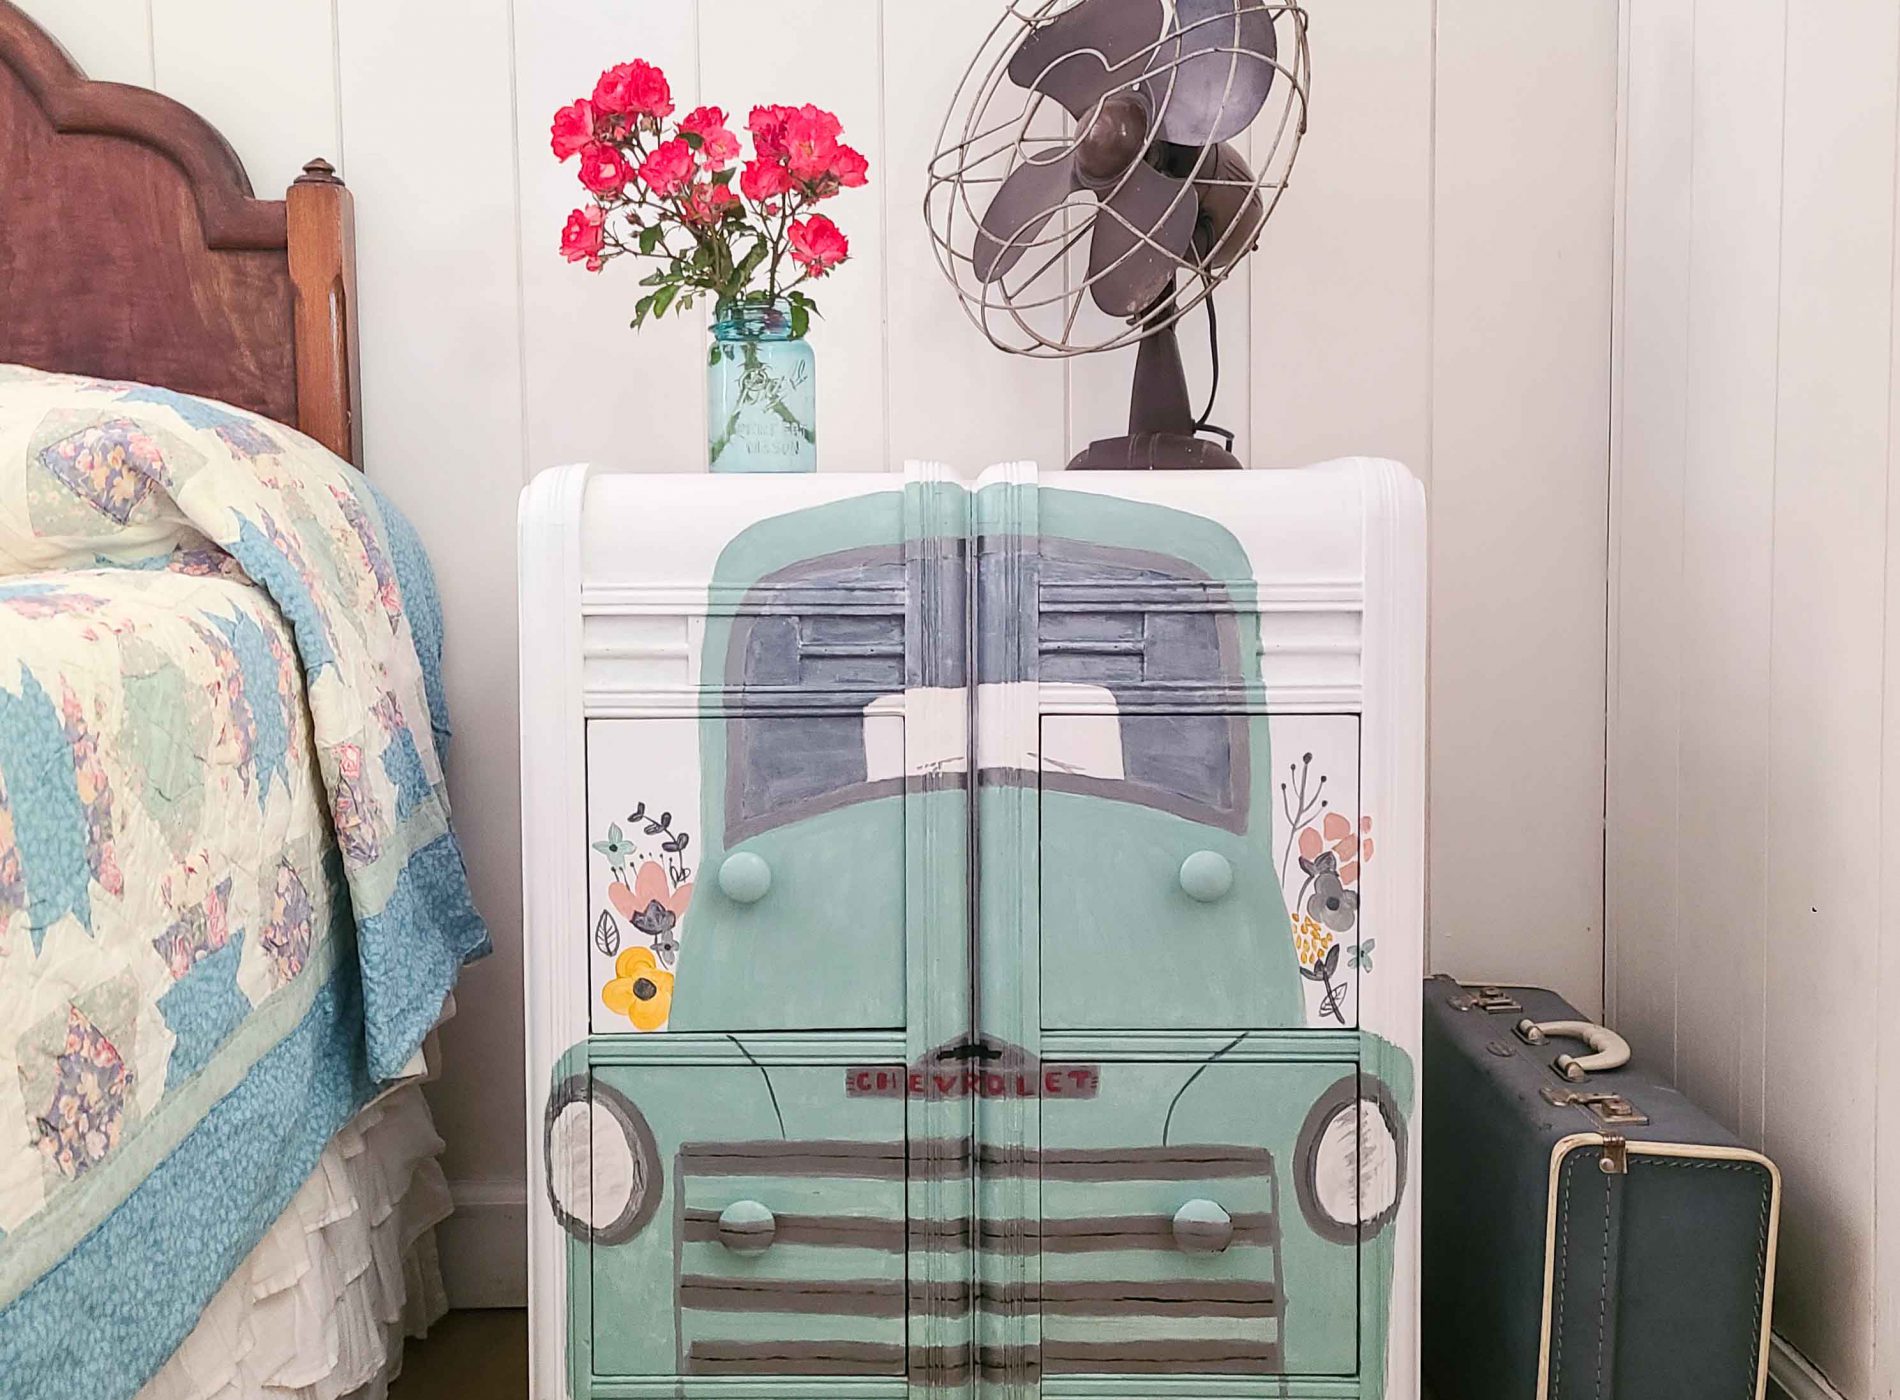 Hand-Painted Chest of Drawers with Vintage Truck by Larissa of Prodigal Pieces | available at shop.prodigalpieces.com #prodigalpieces #shopping #furniture